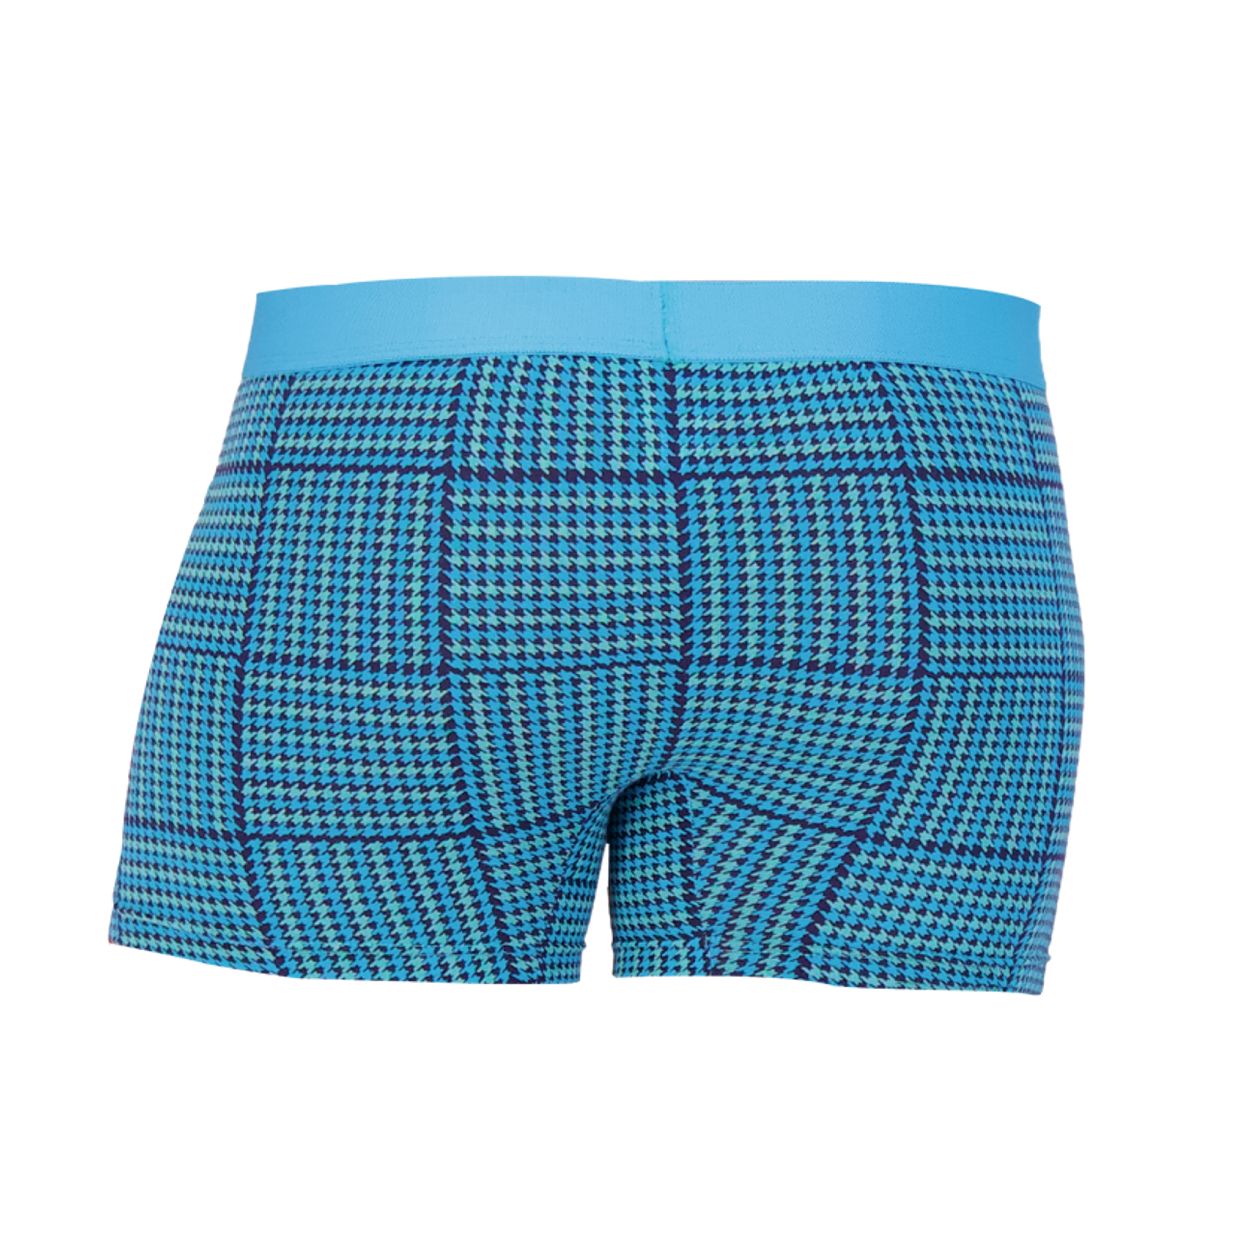 Boxer Brief w/ Fly in Blue Houndstooth by Wood Underwear